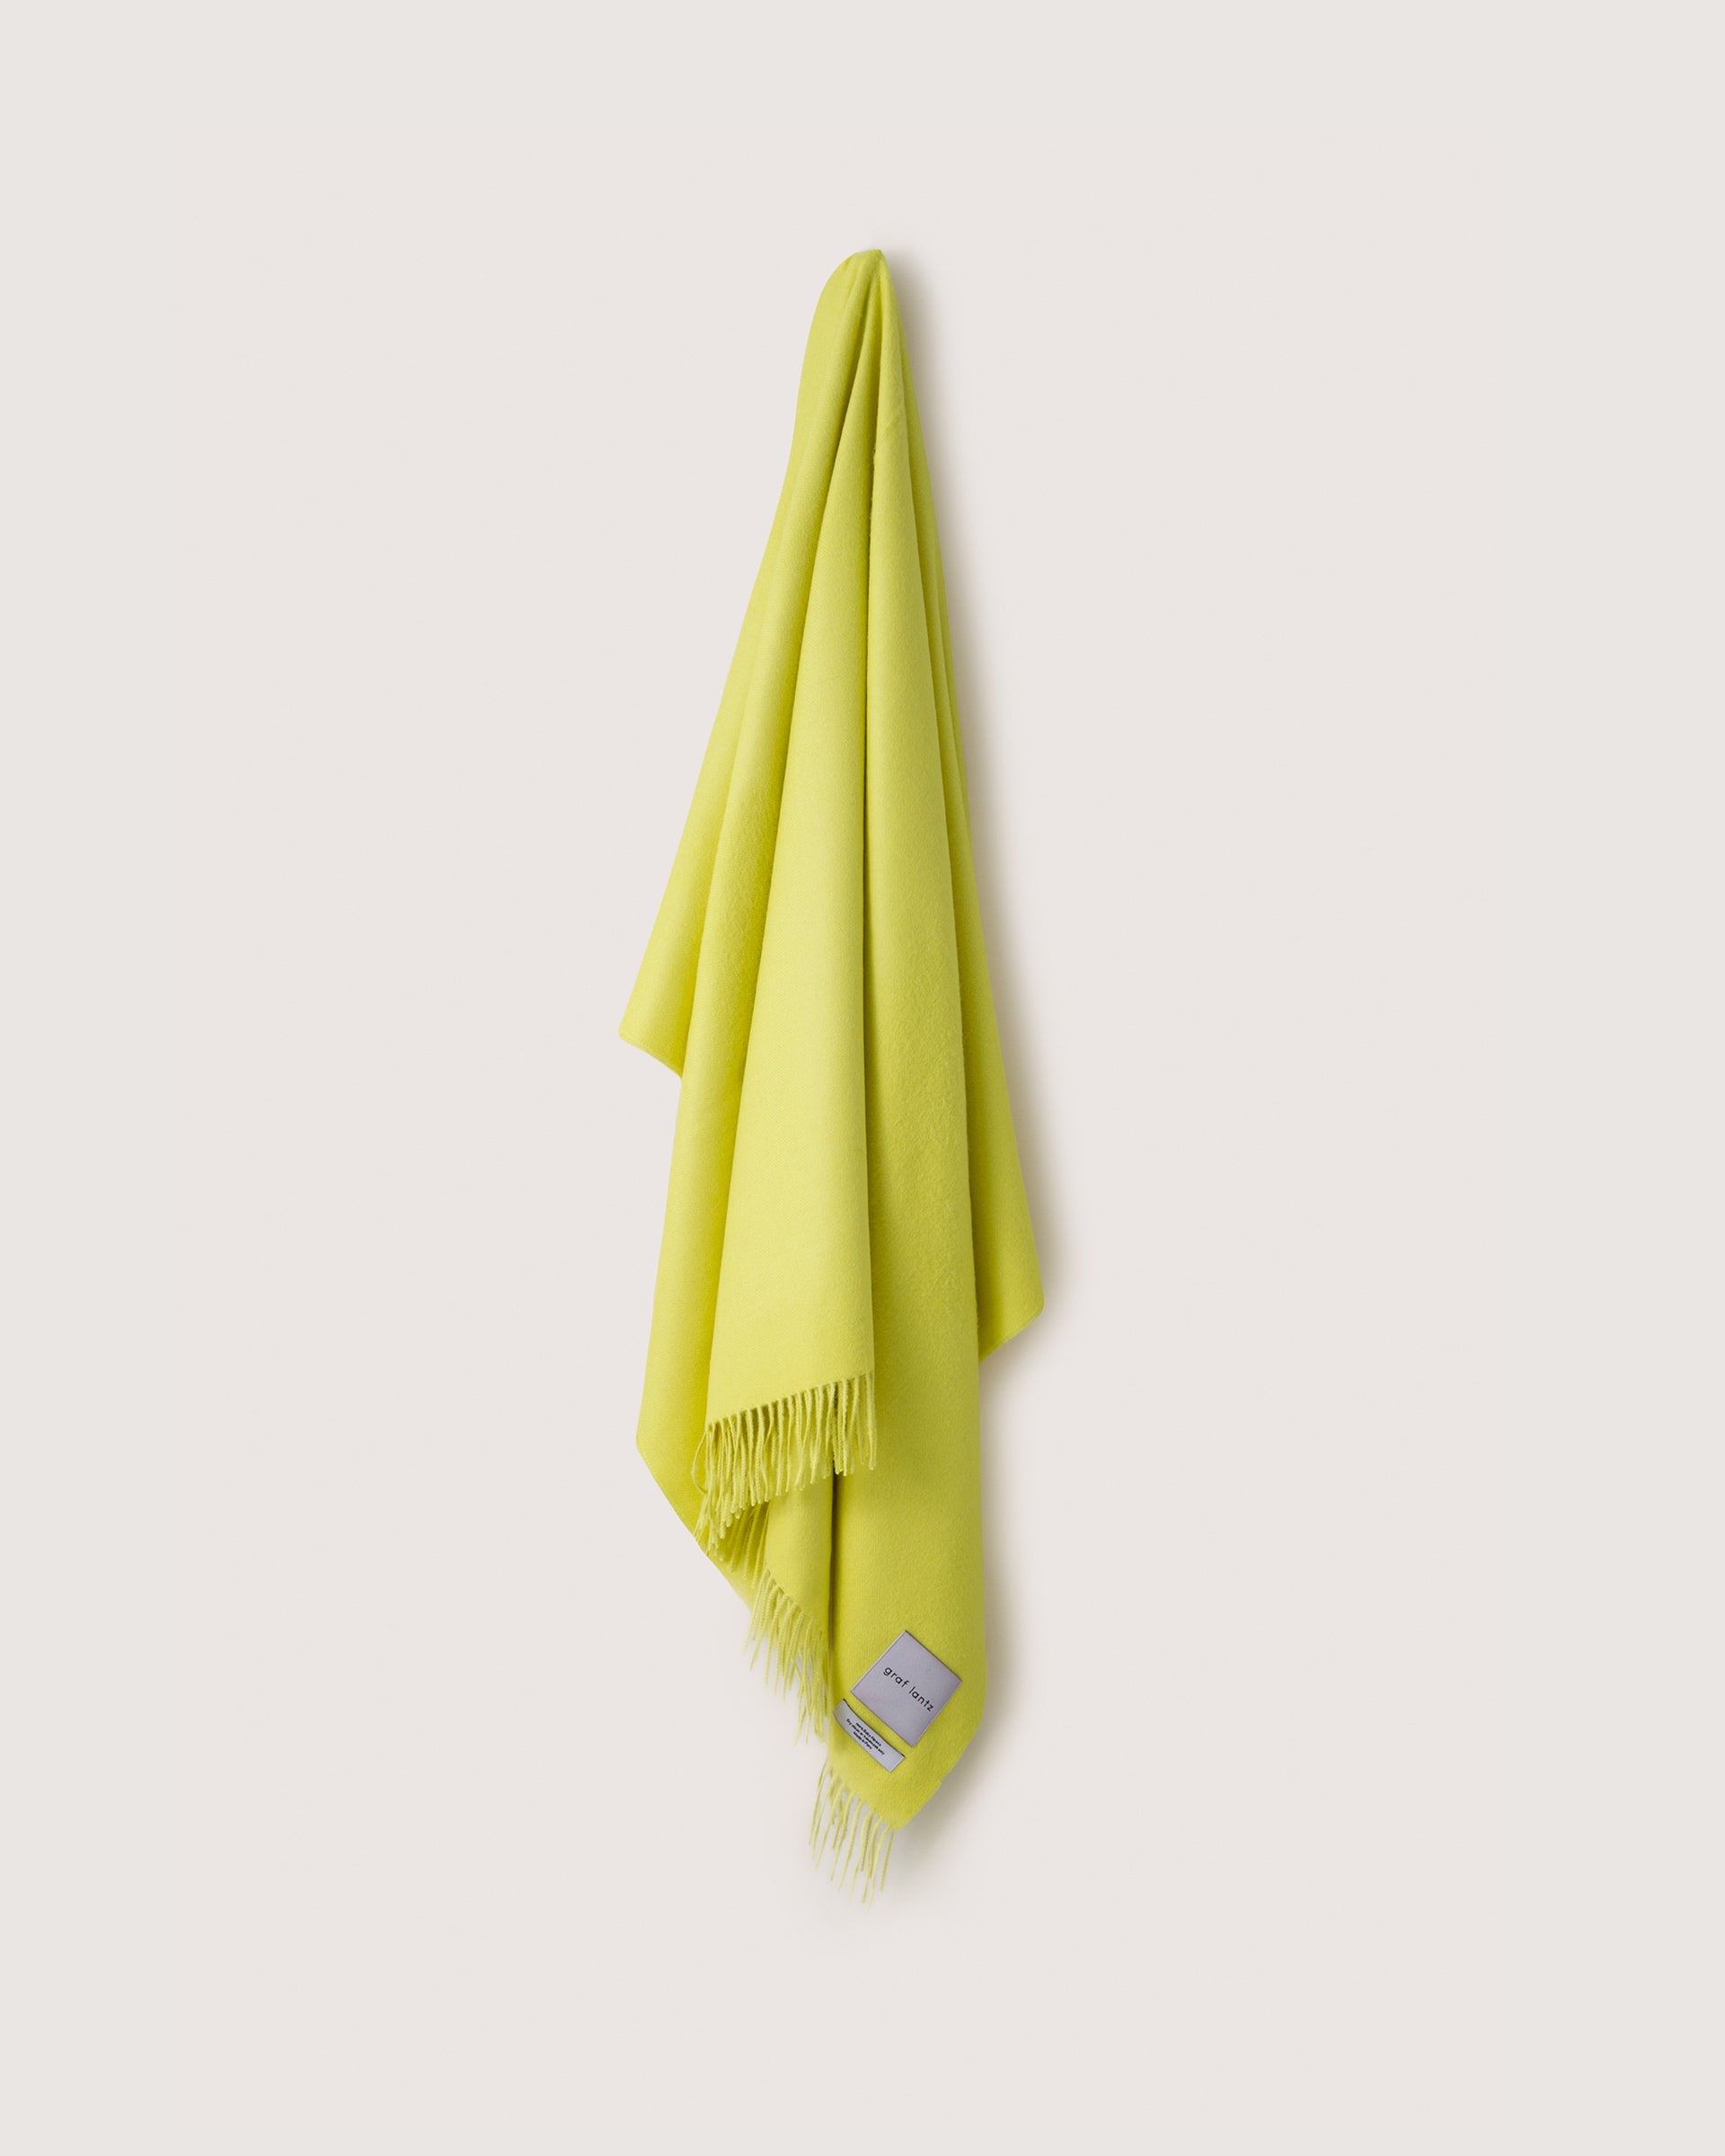 A yellow Alpaca throw hanging on a wall hook, white background